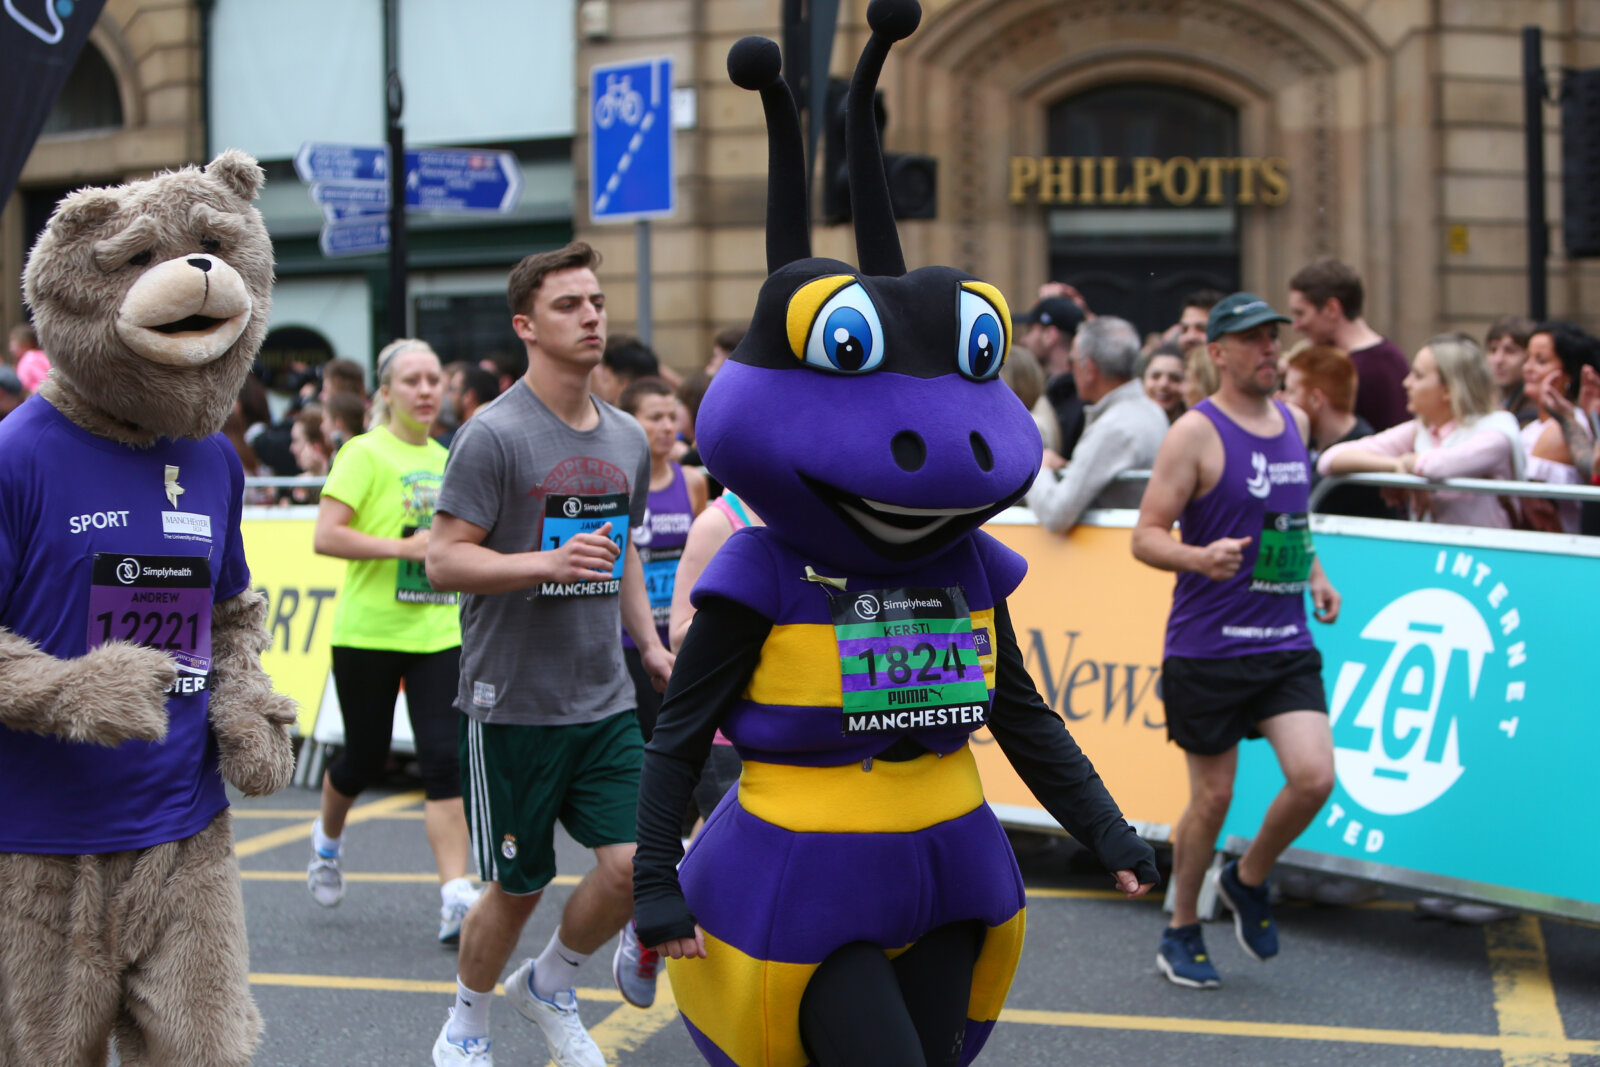 Today is the last chance to enrol for the Great Manchester Run&#8217;s &#8216;We Love Manchester Active Challenge&#8217;, The Manc